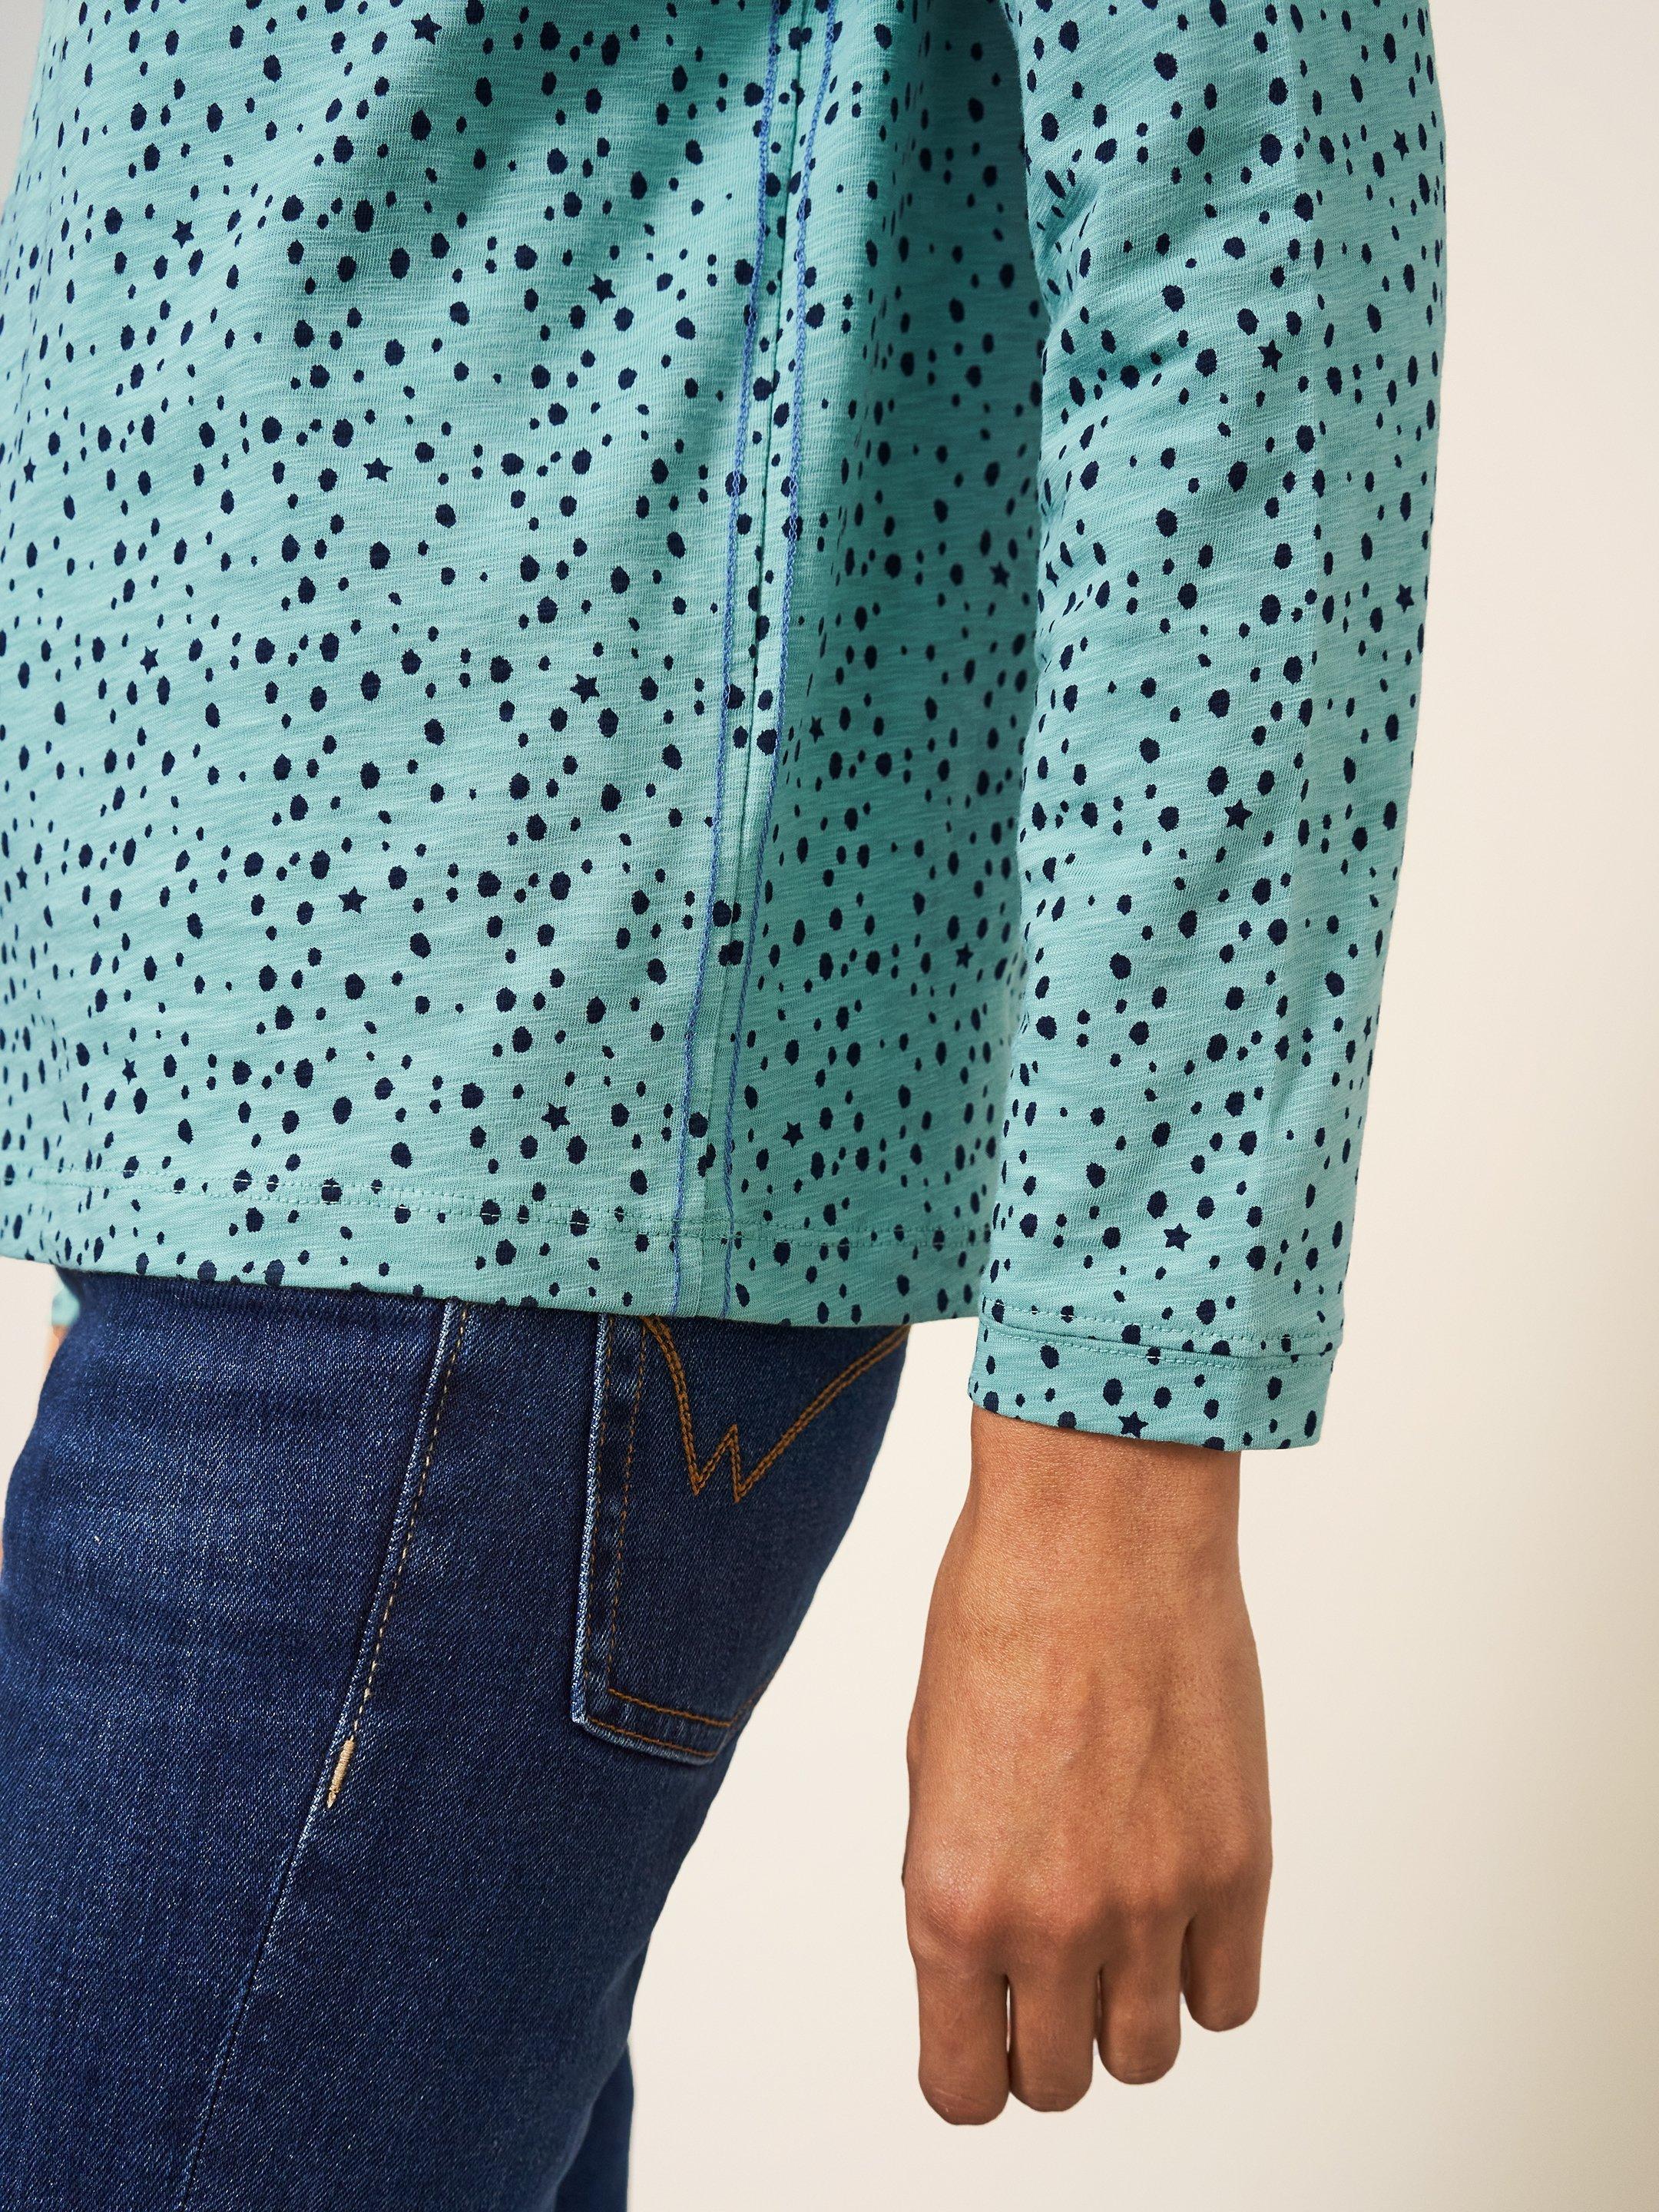 Nelly LS Tee in TEAL PR - MODEL DETAIL